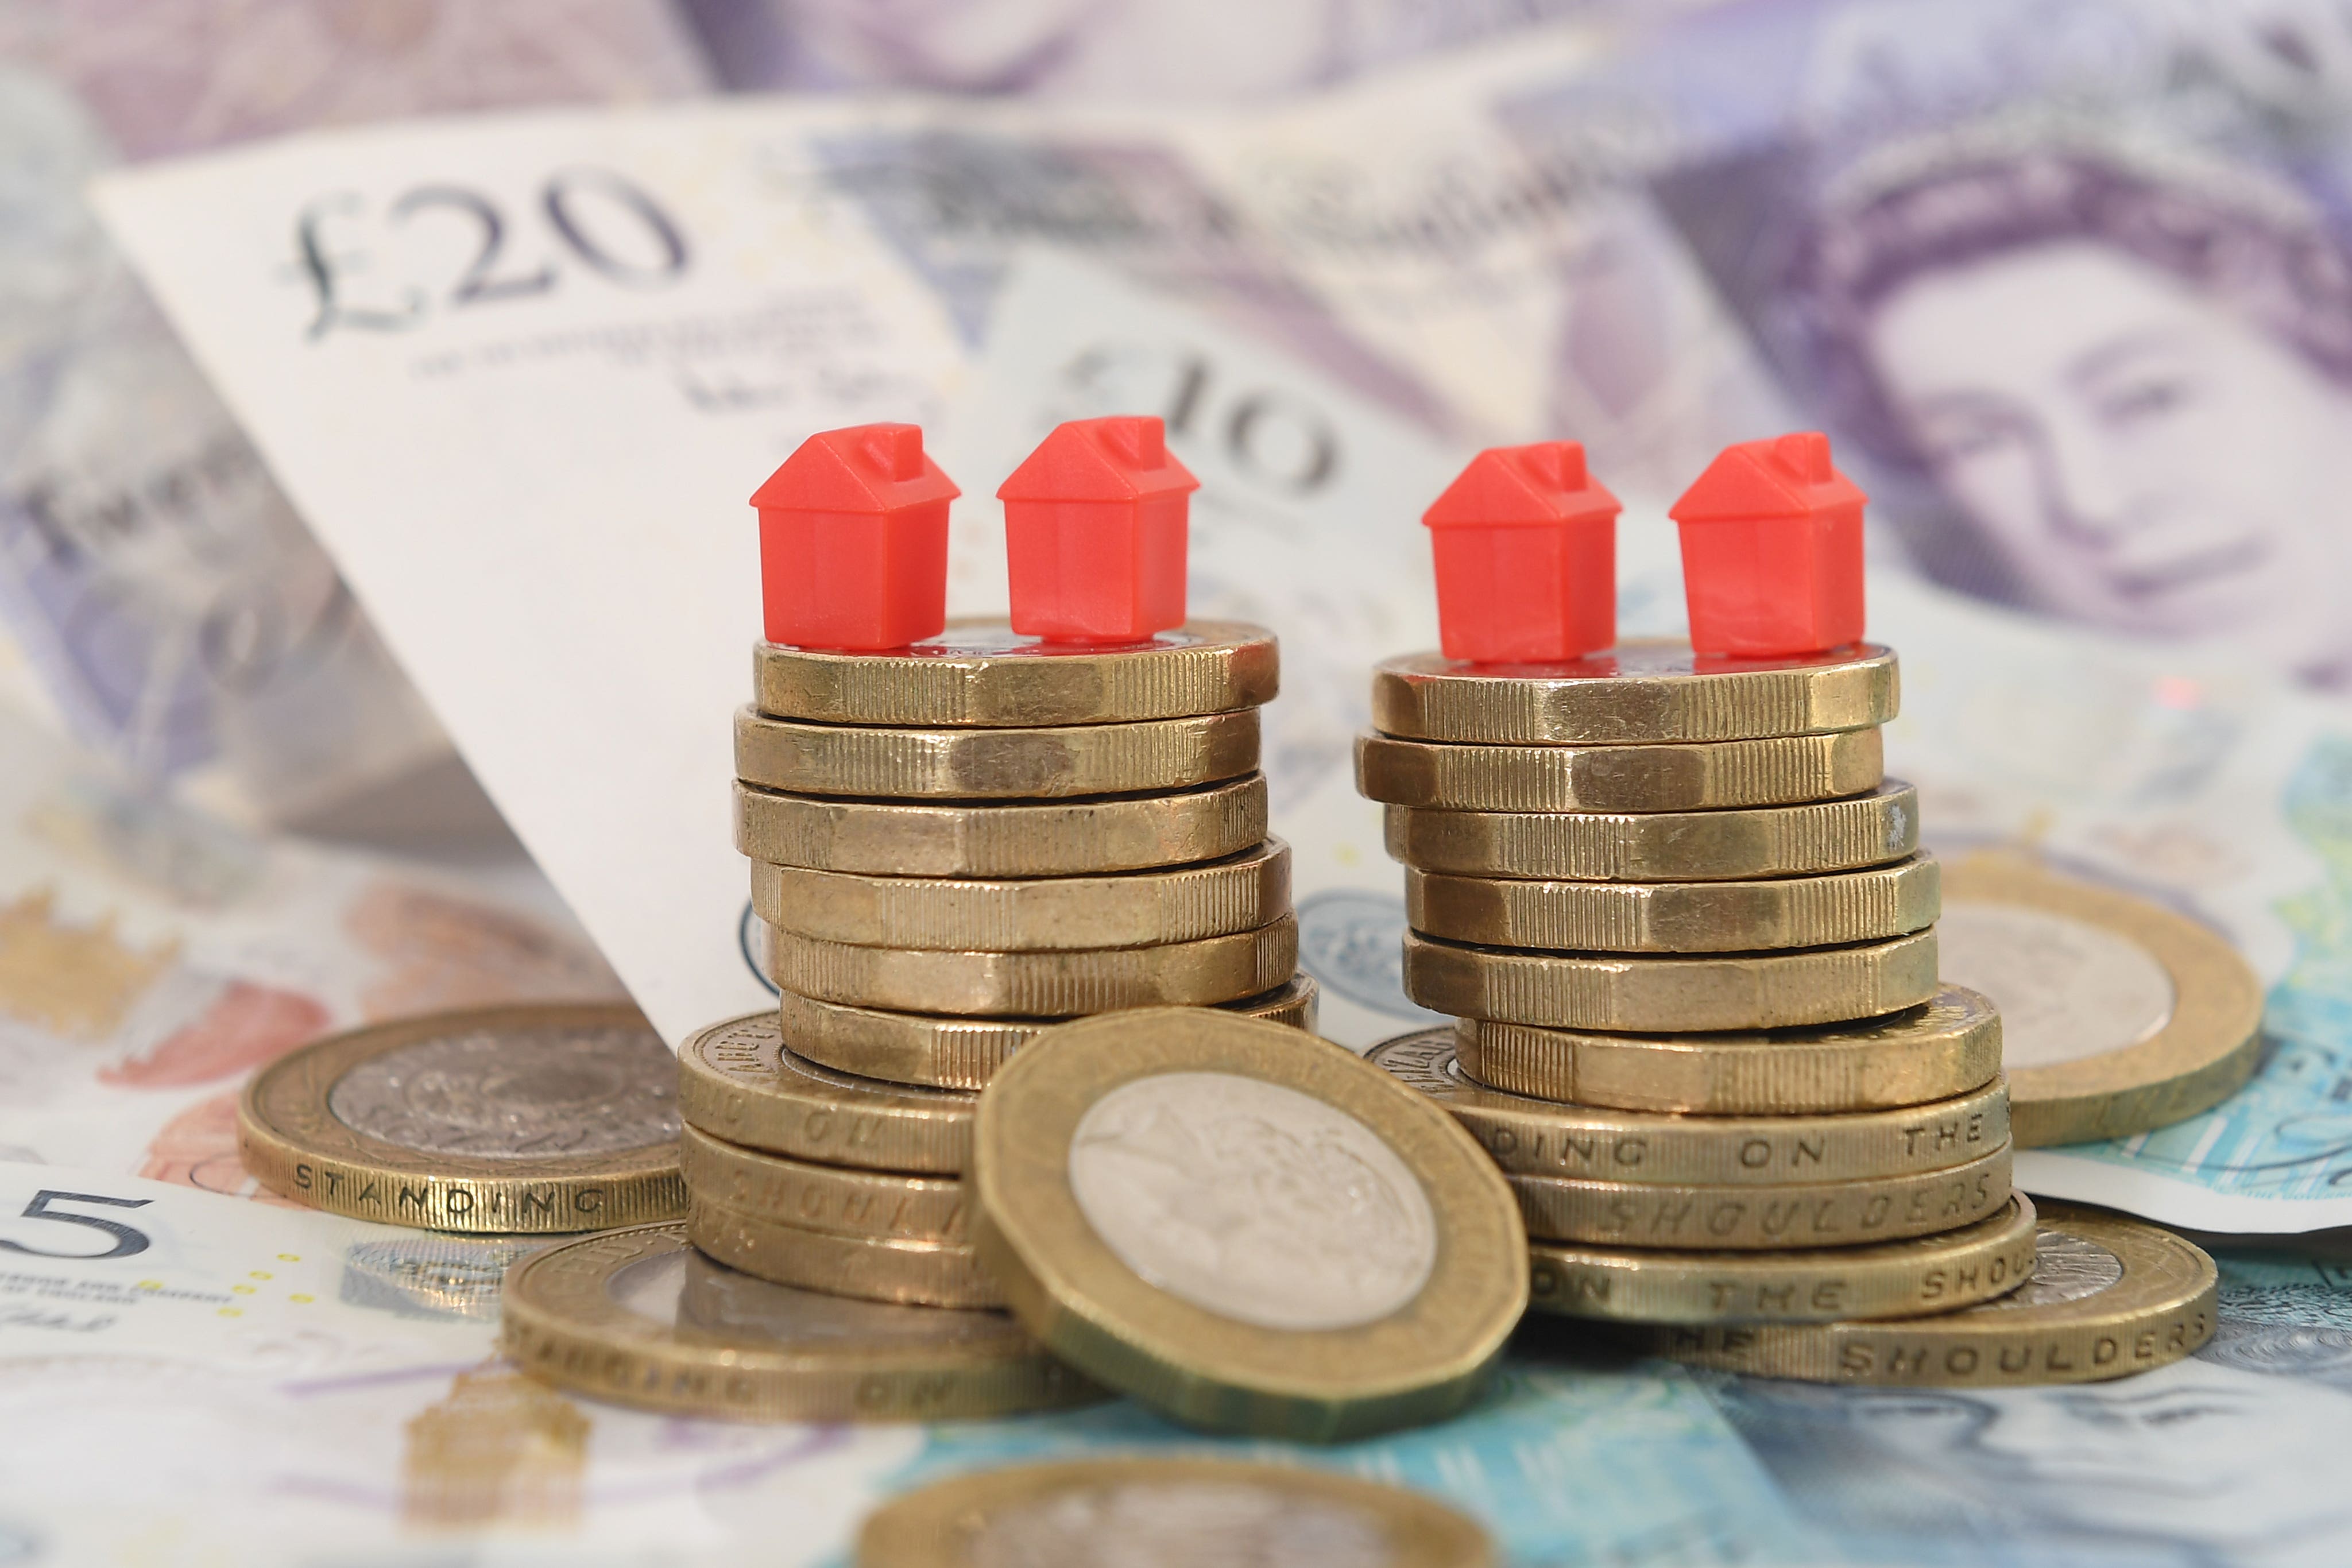 Annual house price growth has slowed but rental prices have increased at their fastest rate since records started in 2016, according to the Office for National Statistics (Joe Giddens/PA)